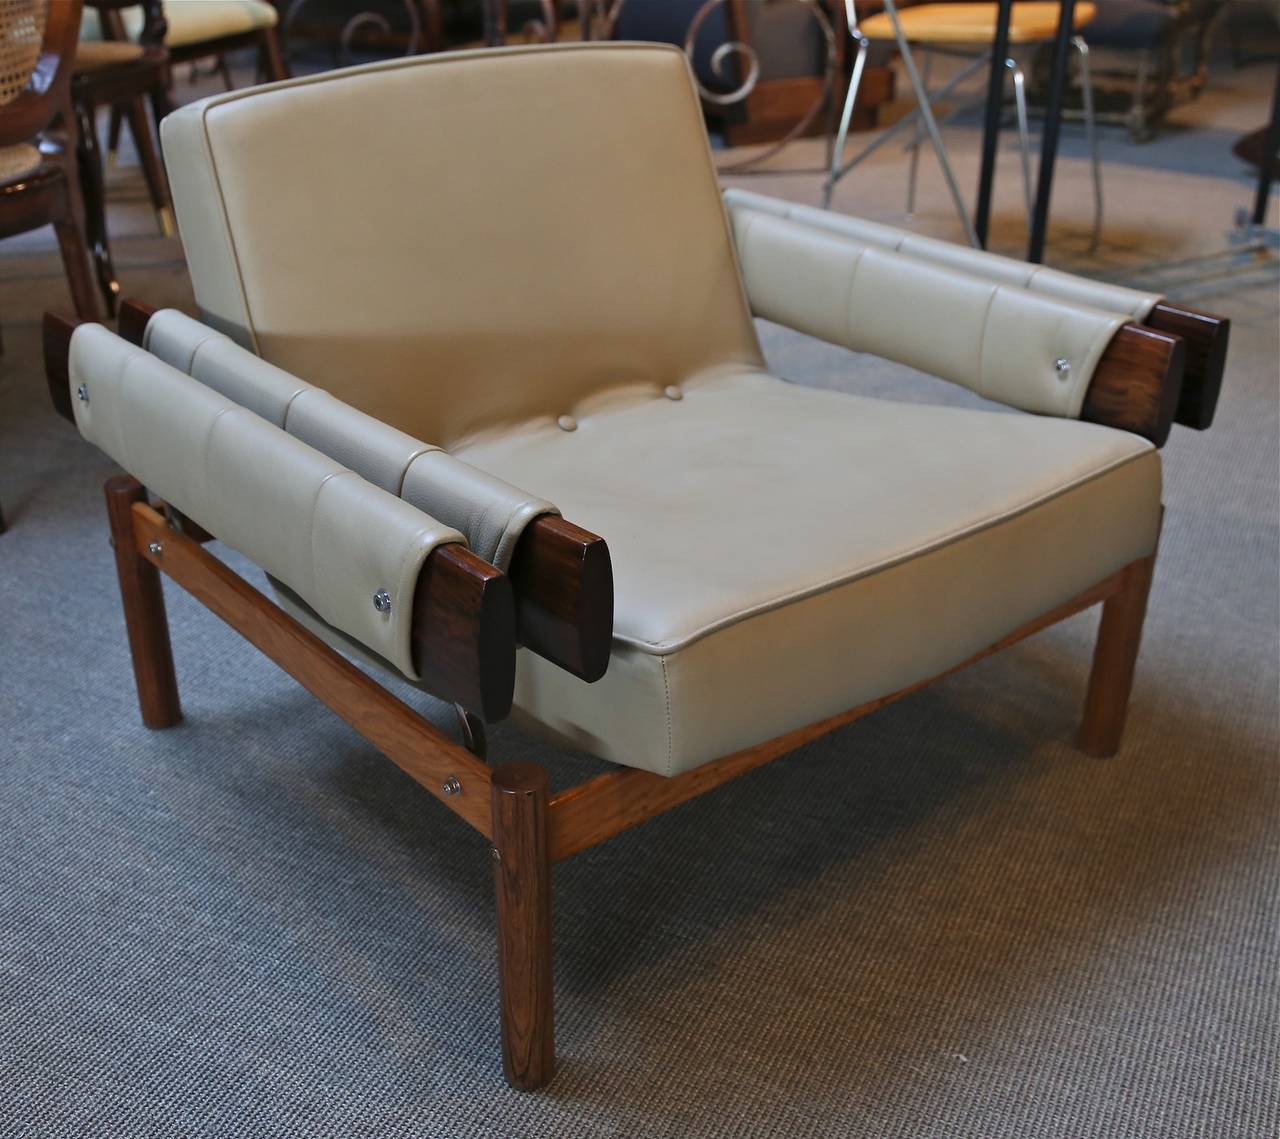 Pair of 1960s Brazilian jacaranda club chairs upholstered with beige leather, by Percival Lafer.